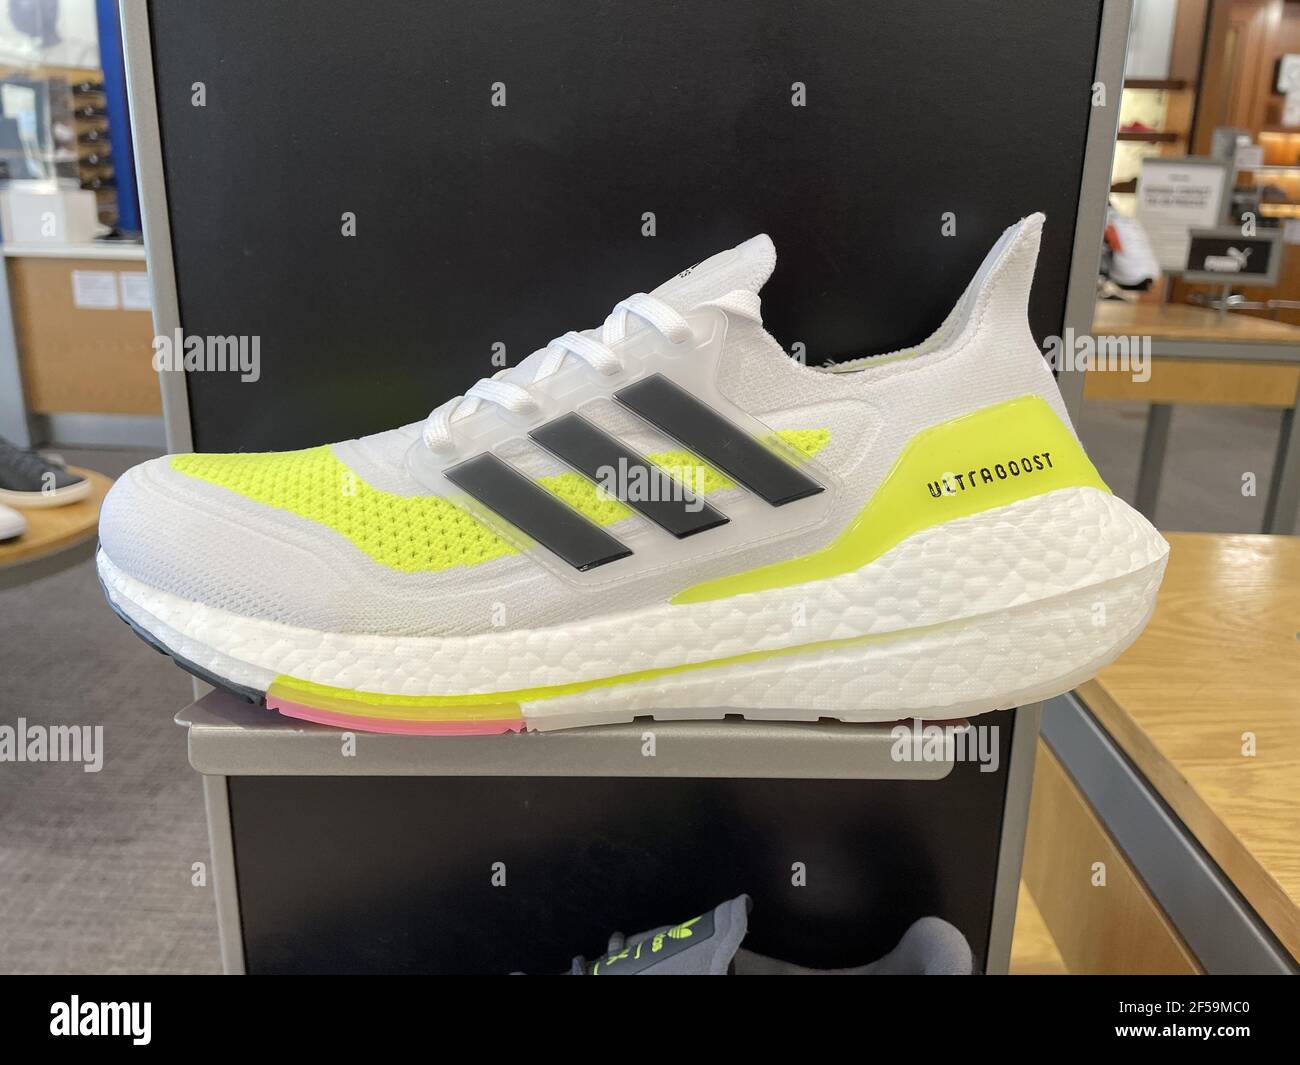 FRESNO, UNITED STATES - Mar 24, 2021: A photo of the New Arrivals of Adidas  UltraBoost Neon yellow and white with black stripes Mens Shoes on store sh  Stock Photo - Alamy